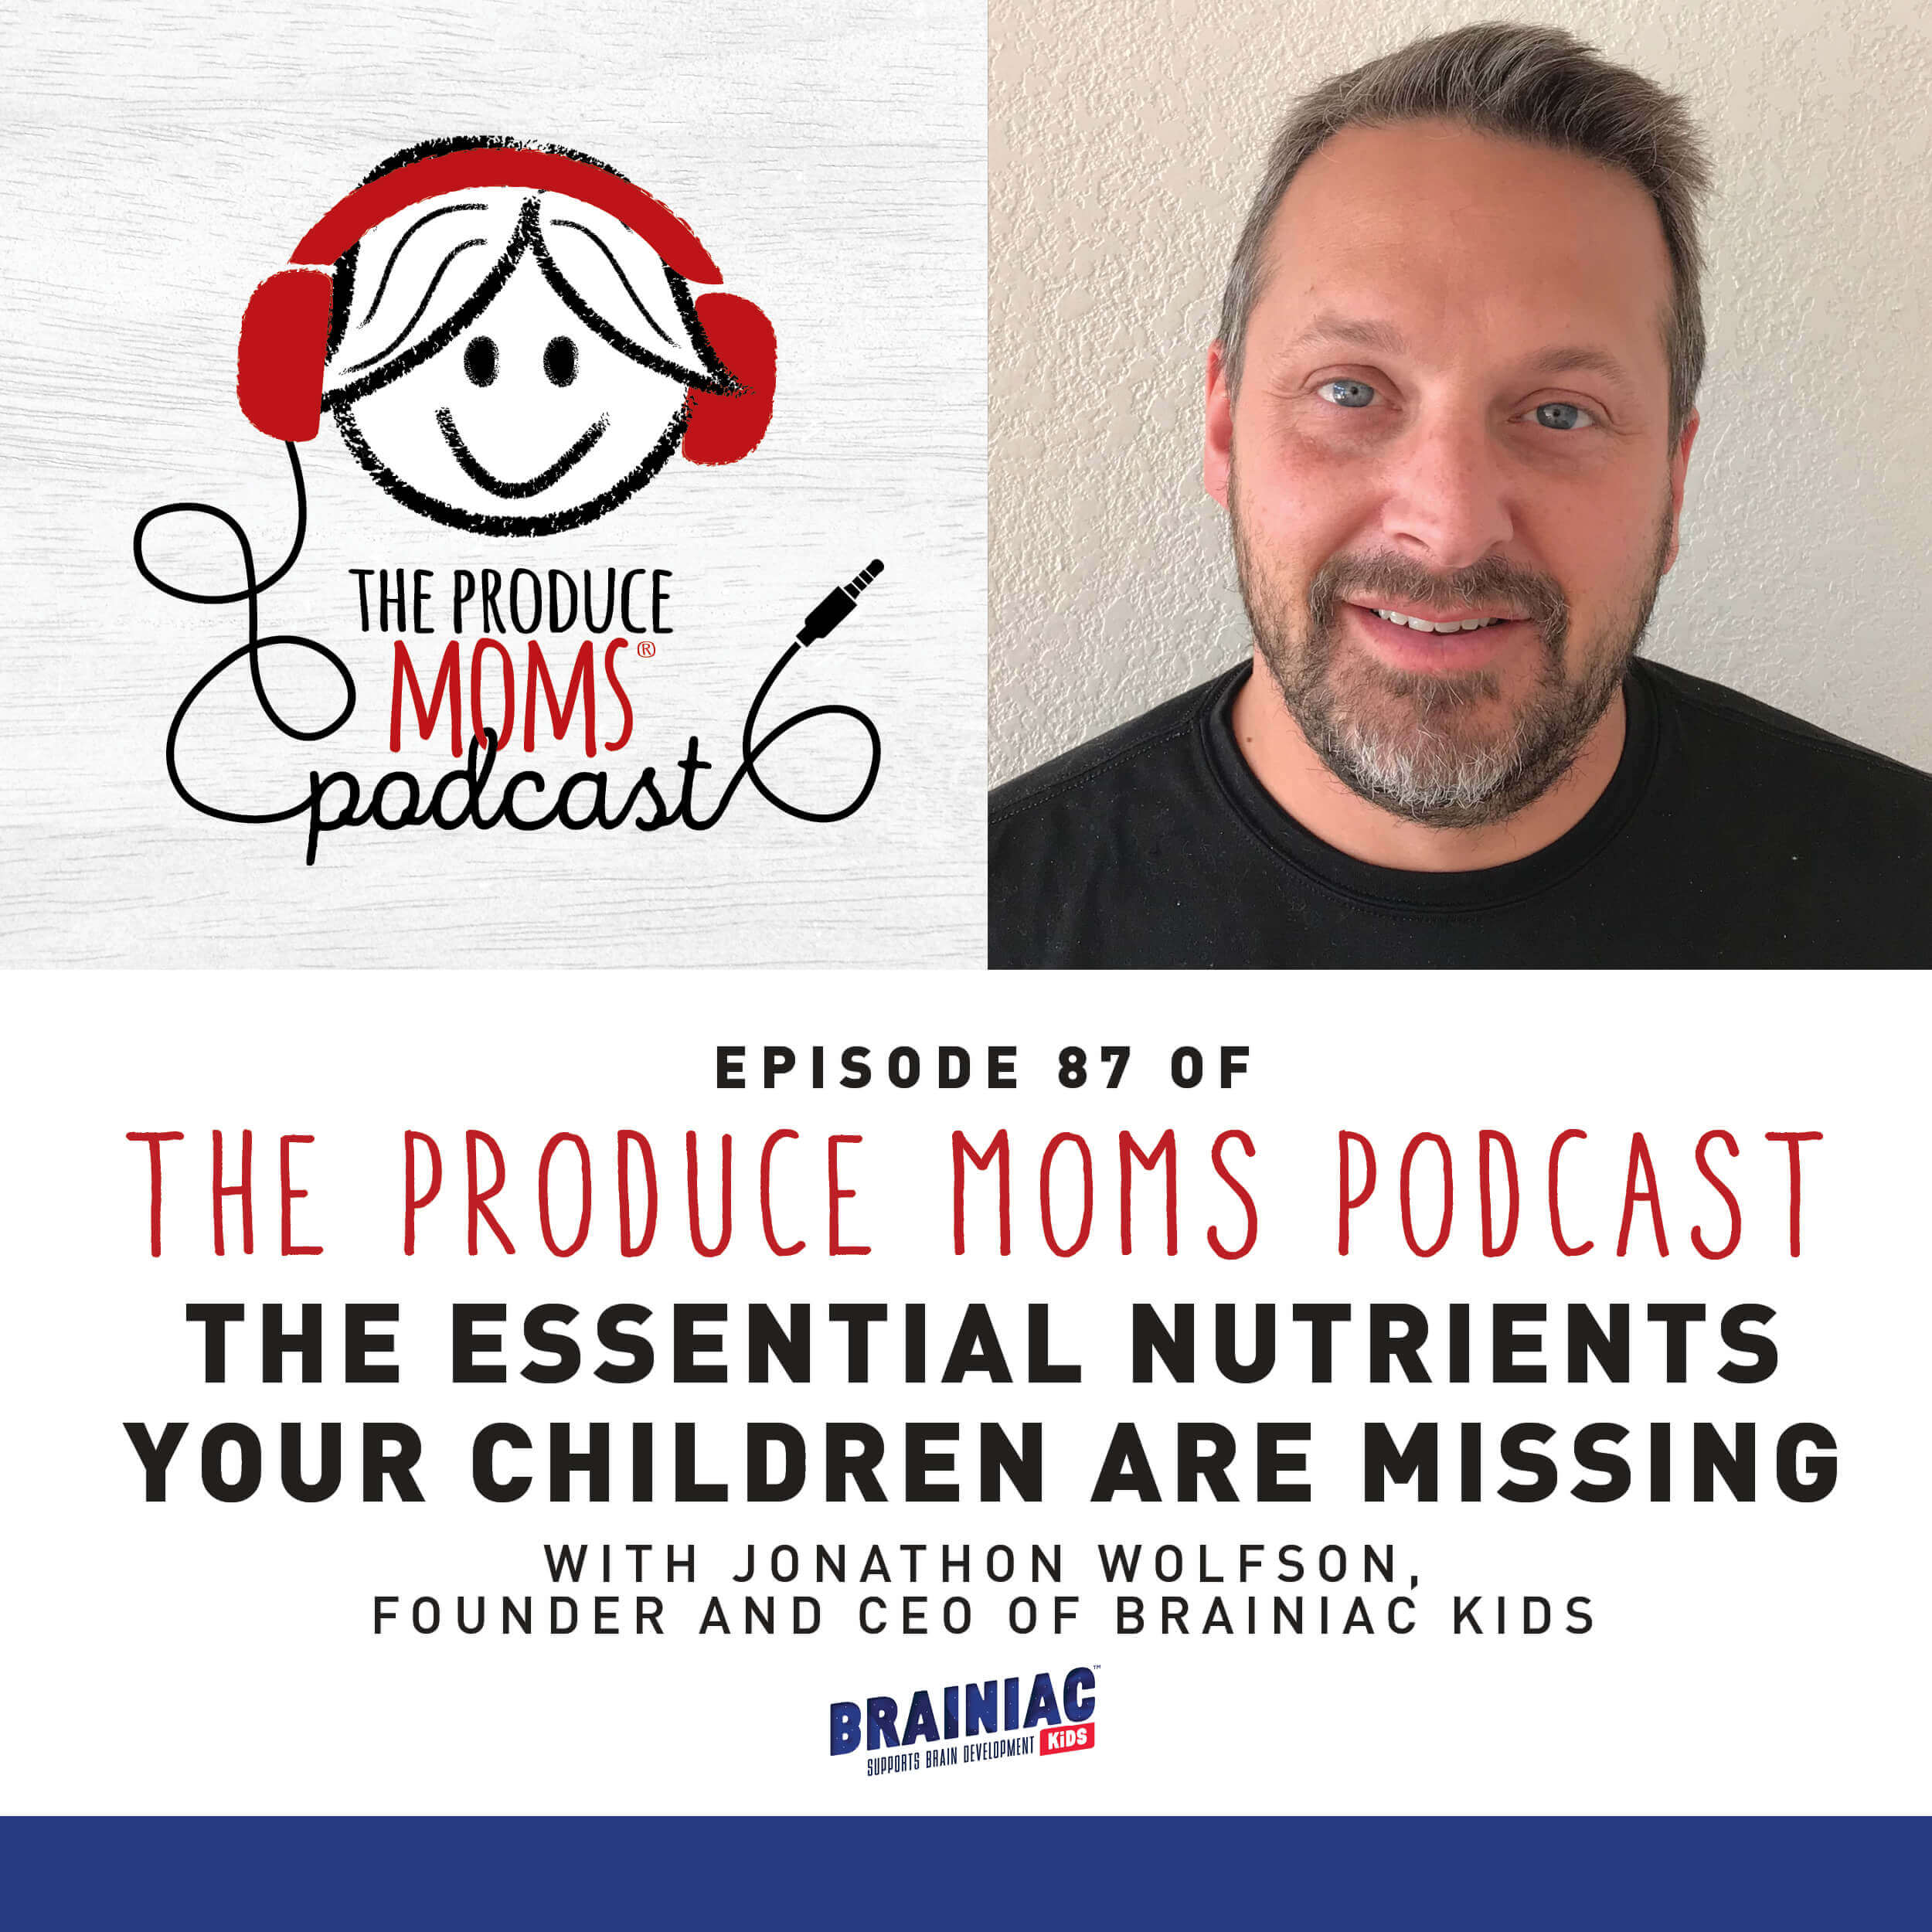 Episode 87: The Essential Nutrients Your Children are Missing with Jonathon Wolfson, Founder and CEO of Brainiac Kids